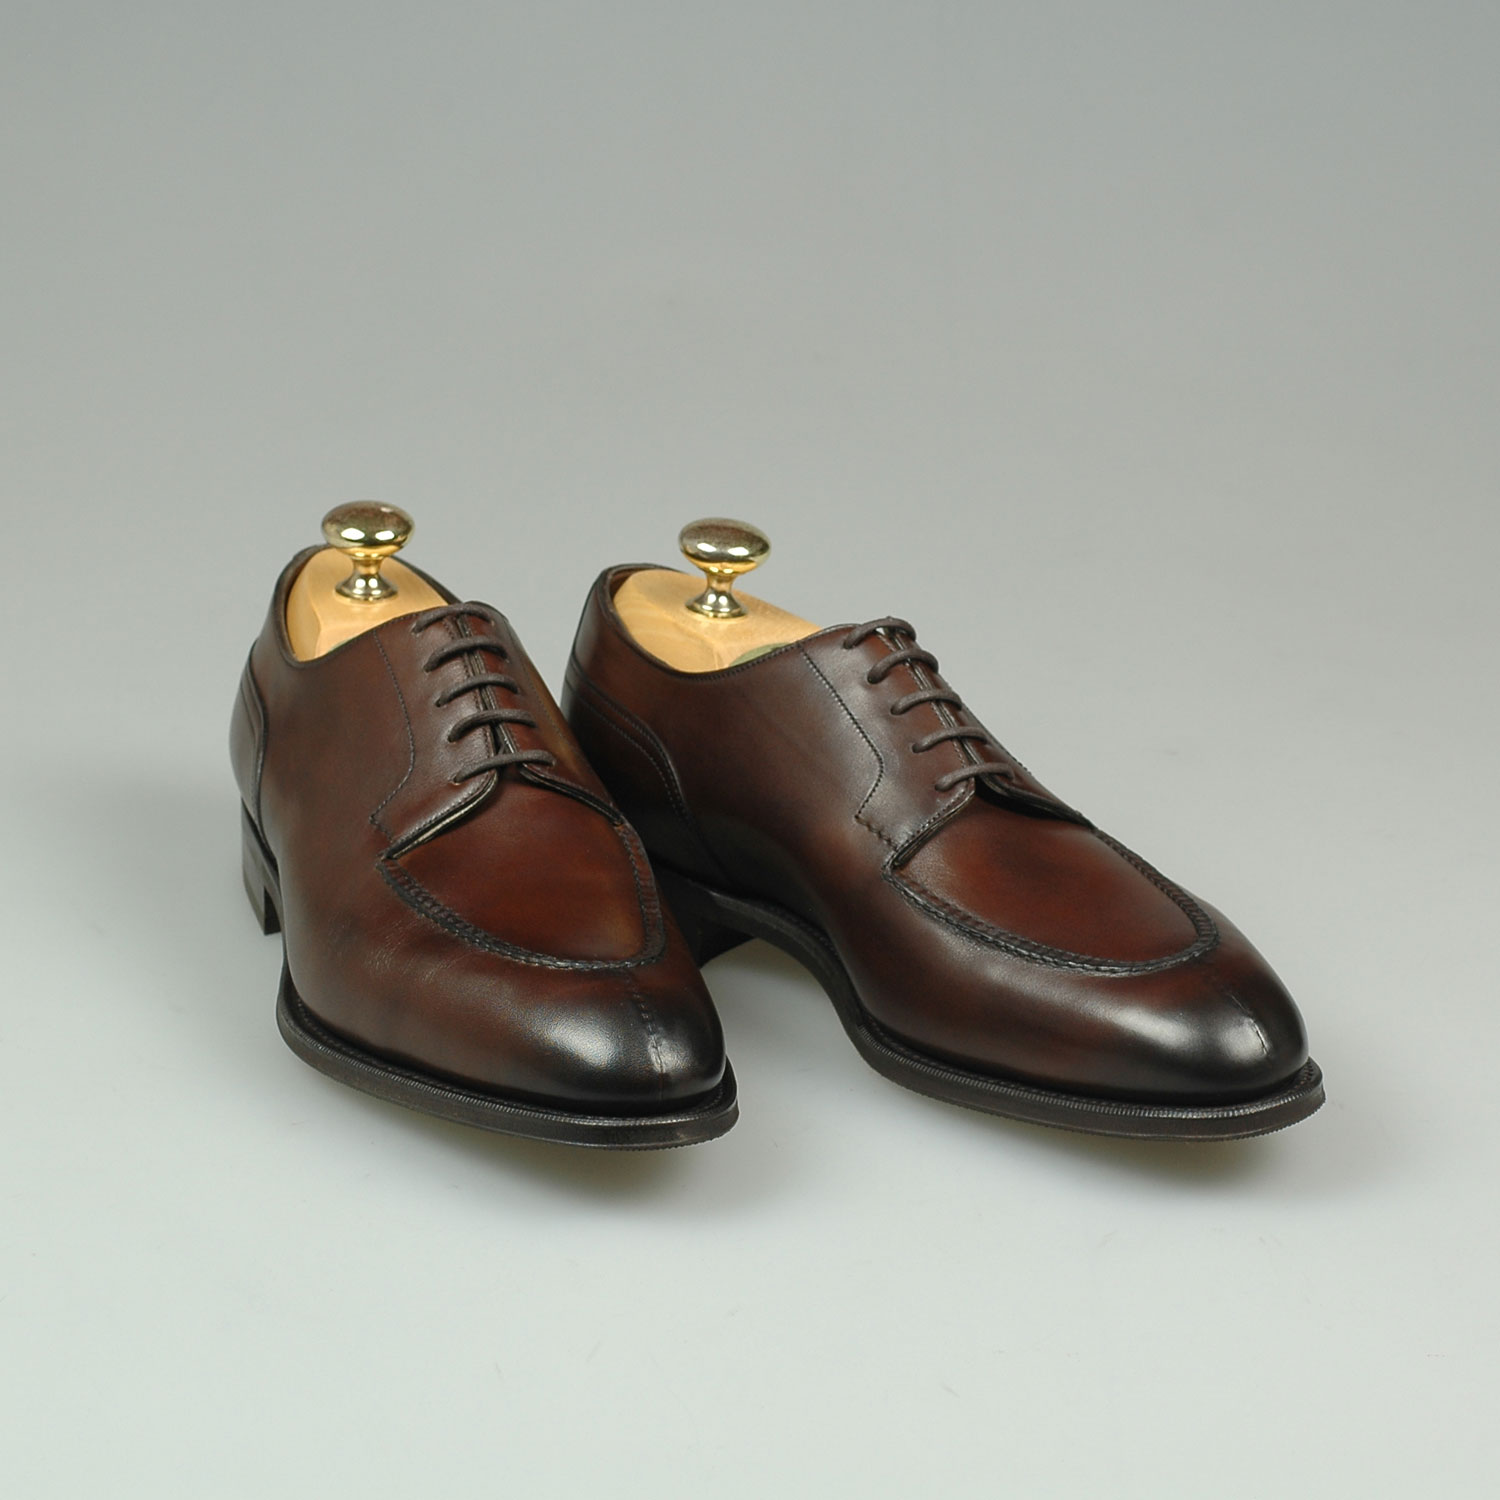 Shop Edward Green Dover online at Shoes & Shirts